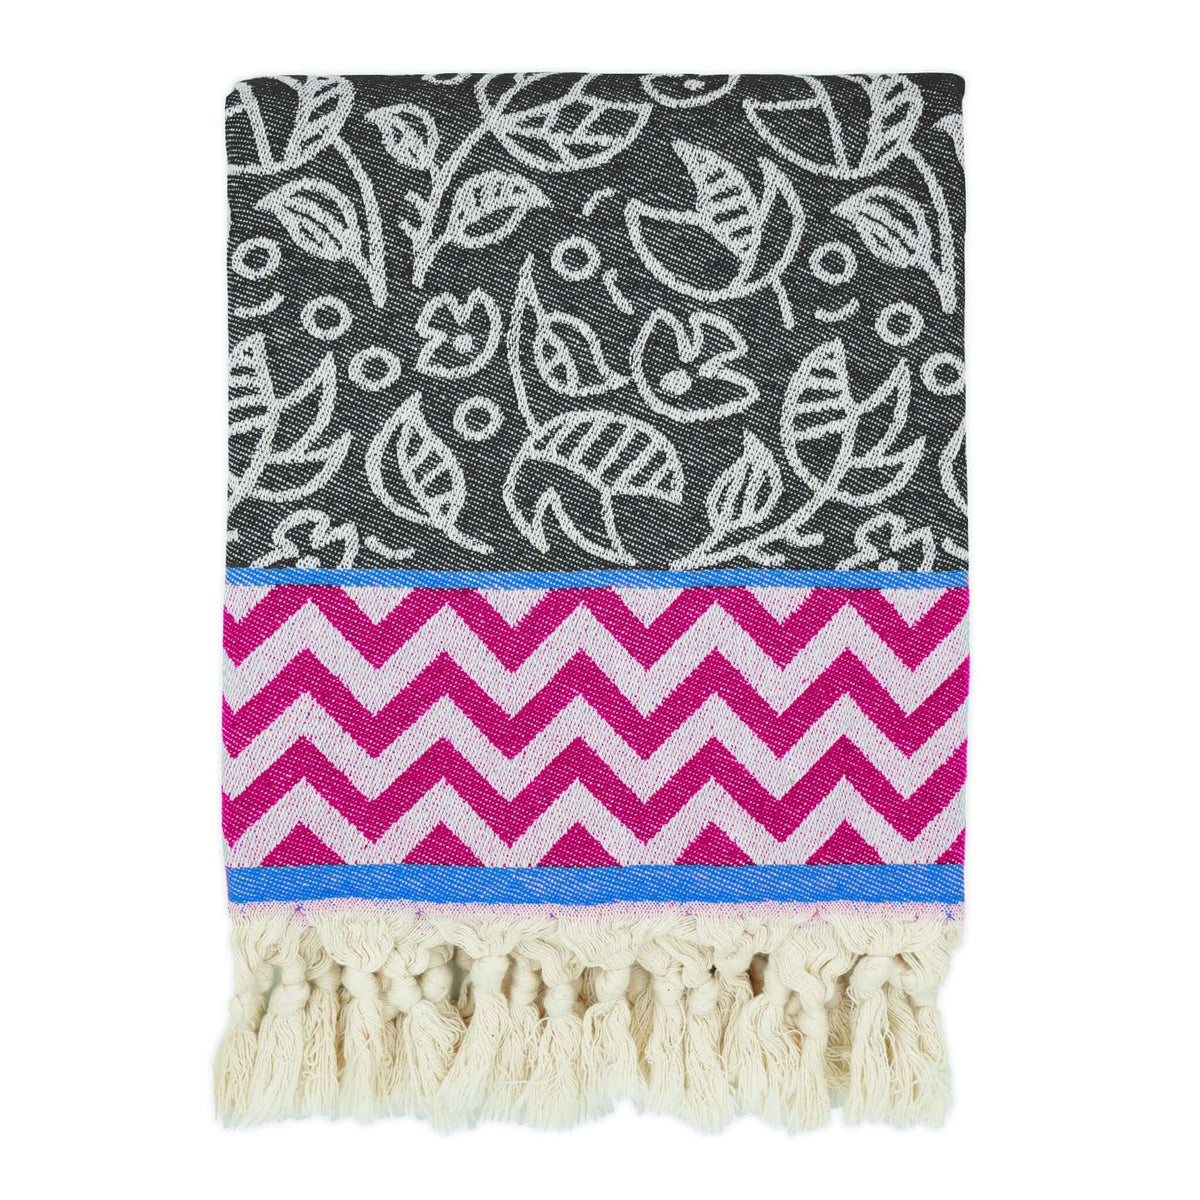 turkish towel black flower and red zigzag pattern with tassels knots vibrant colours fun design designer fashinable